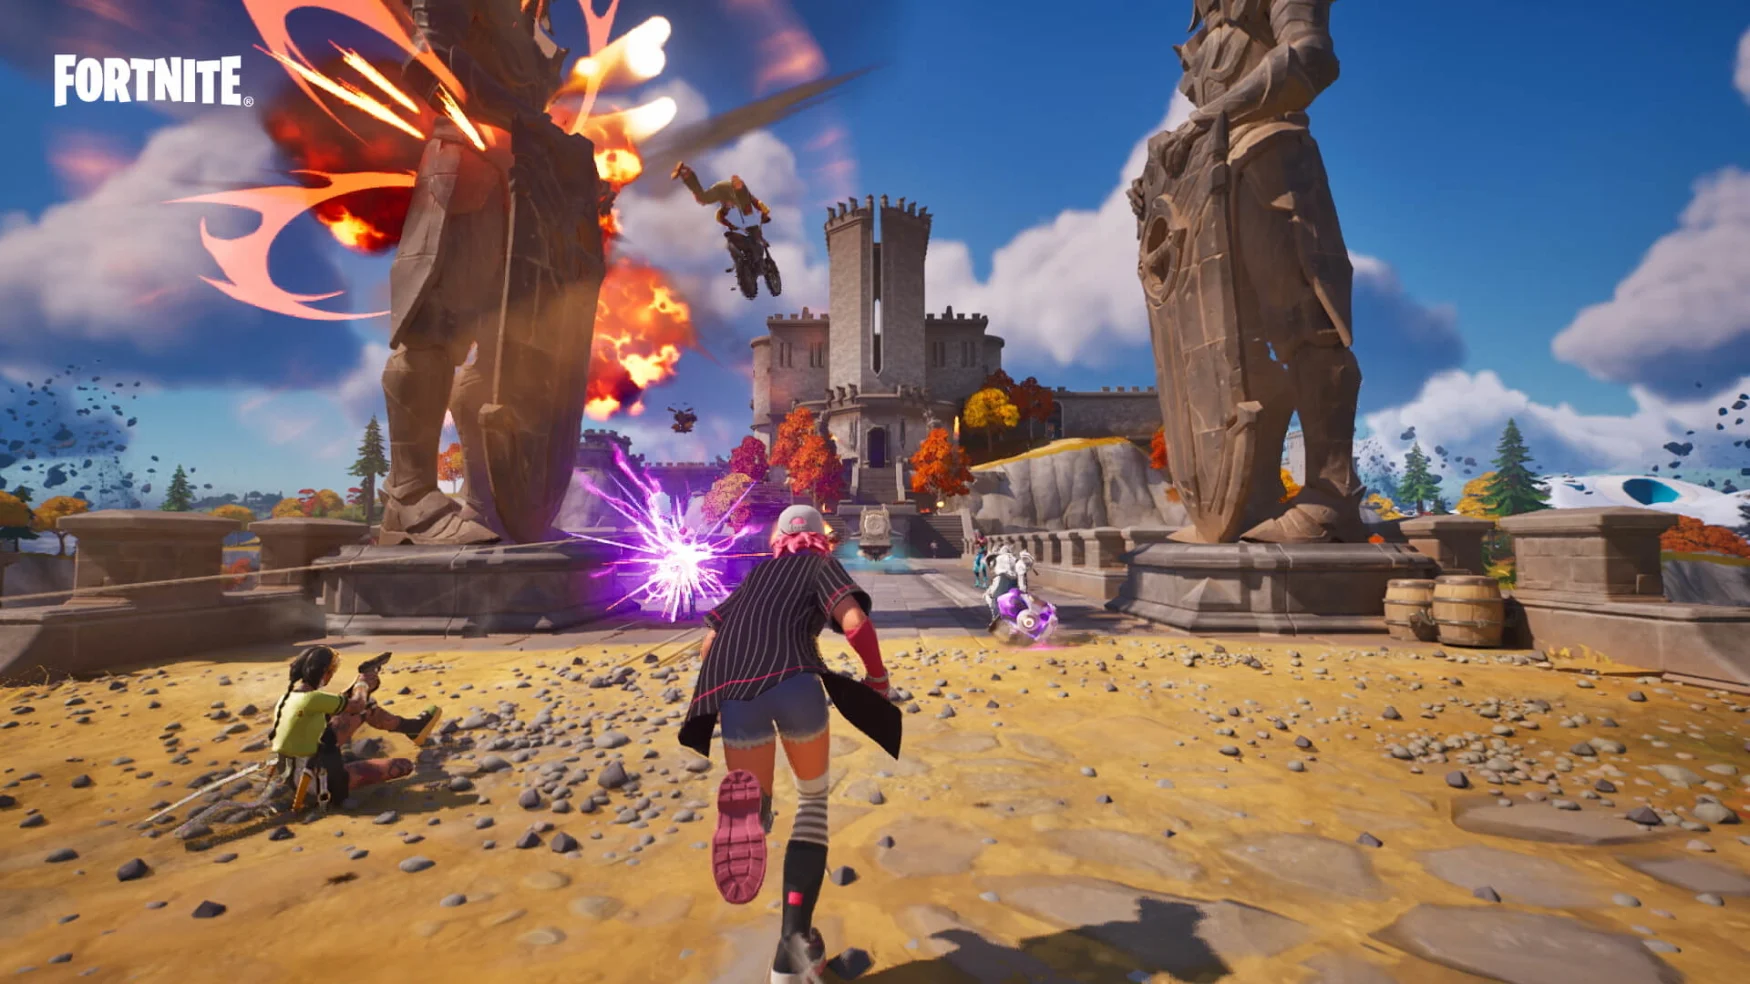 A character runs into battle in Fortnite as an explosion is set off to the side.